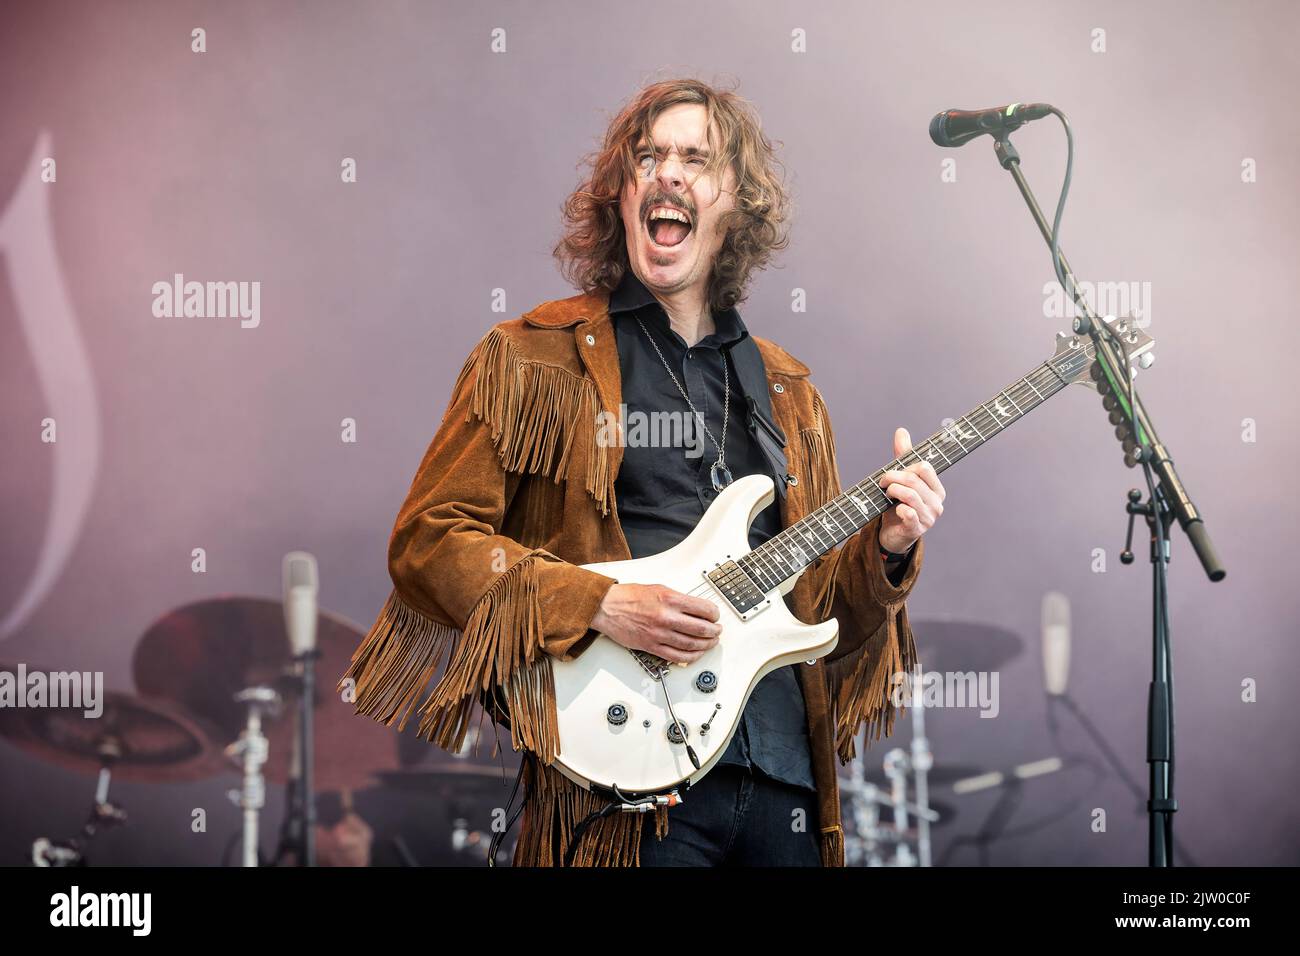 Solvesborg, Sweden. 10th, June 2022. The progressive Swedish death metal band Opeth performs a live concert during the Swedish music festival Sweden Rock Festival 2022 in Solvesborg. Here vocalist and guitarist Mikael Aakerfeldt is seen live on stage. (Photo credit: Gonzales Photo - Terje Dokken). Stock Photo